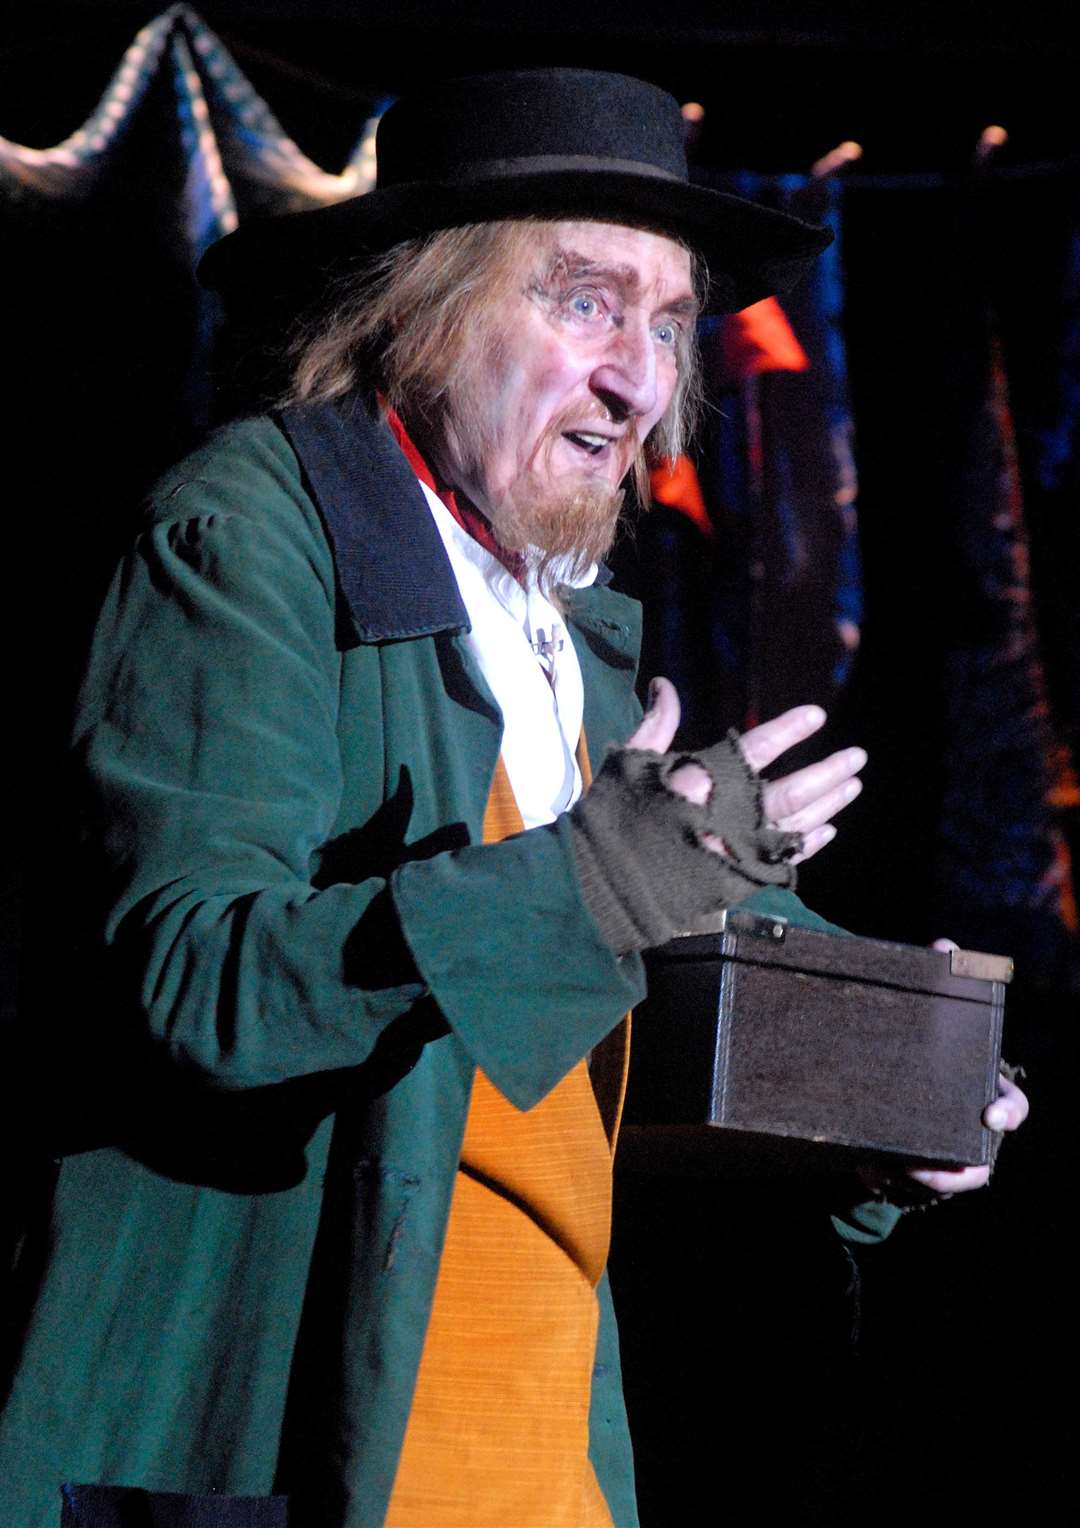 Ron Moody is best known for his starring role as Fagin in Lionel Bart's stage and film musical Oliver! Picture: Paul Clapp